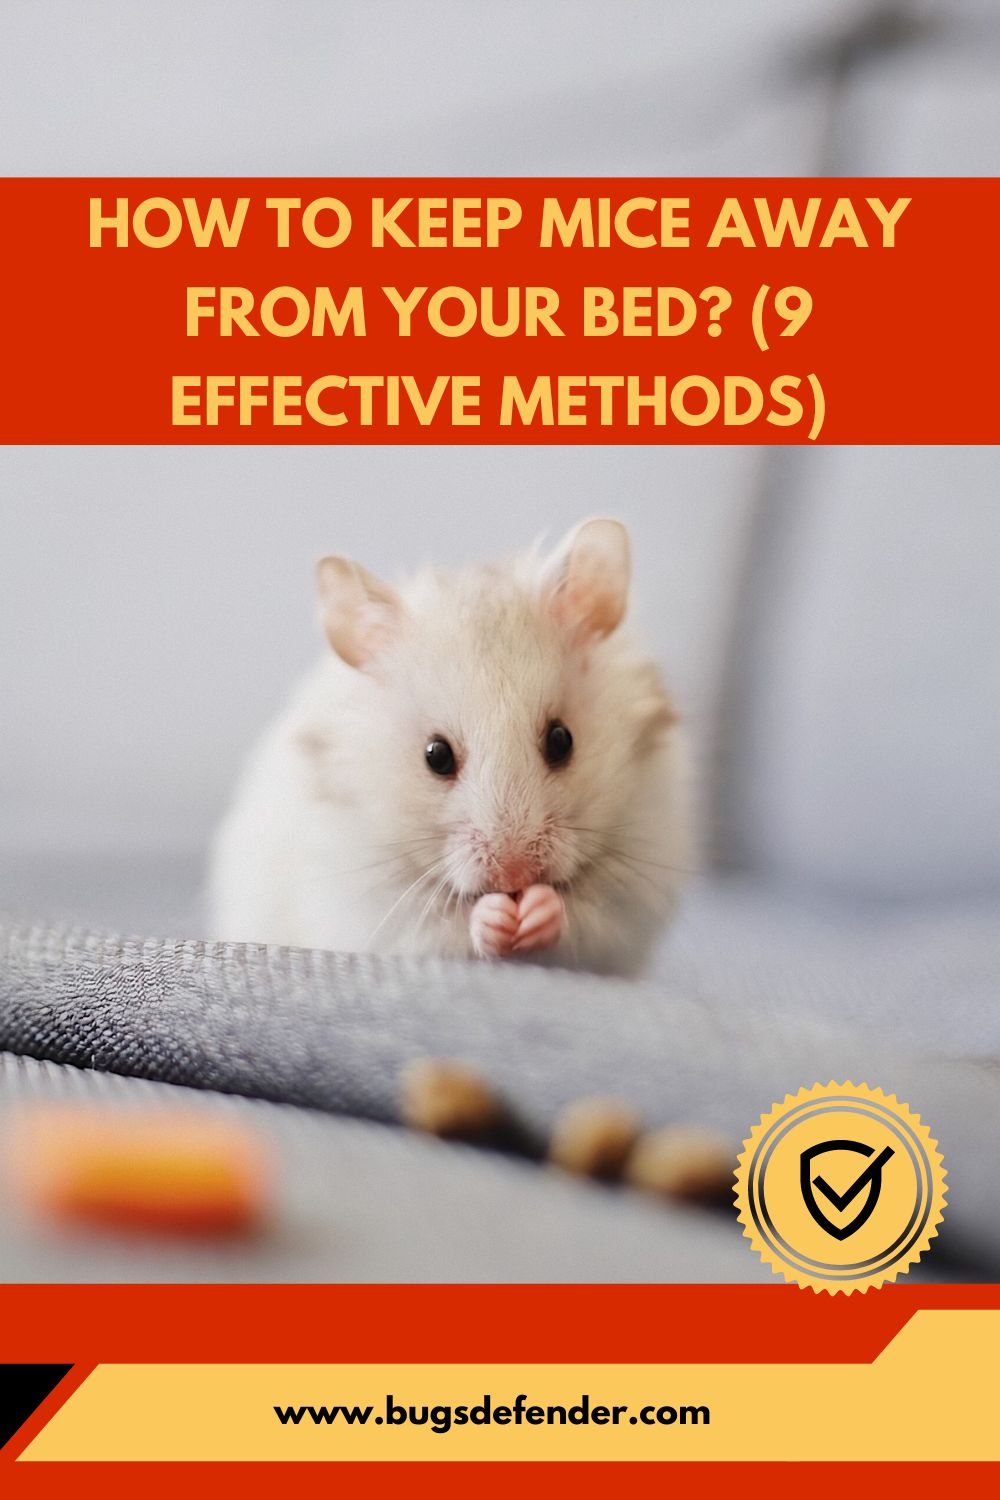 How to Keep Mice Away from Your Bed? (9 Effective Methods) pin1